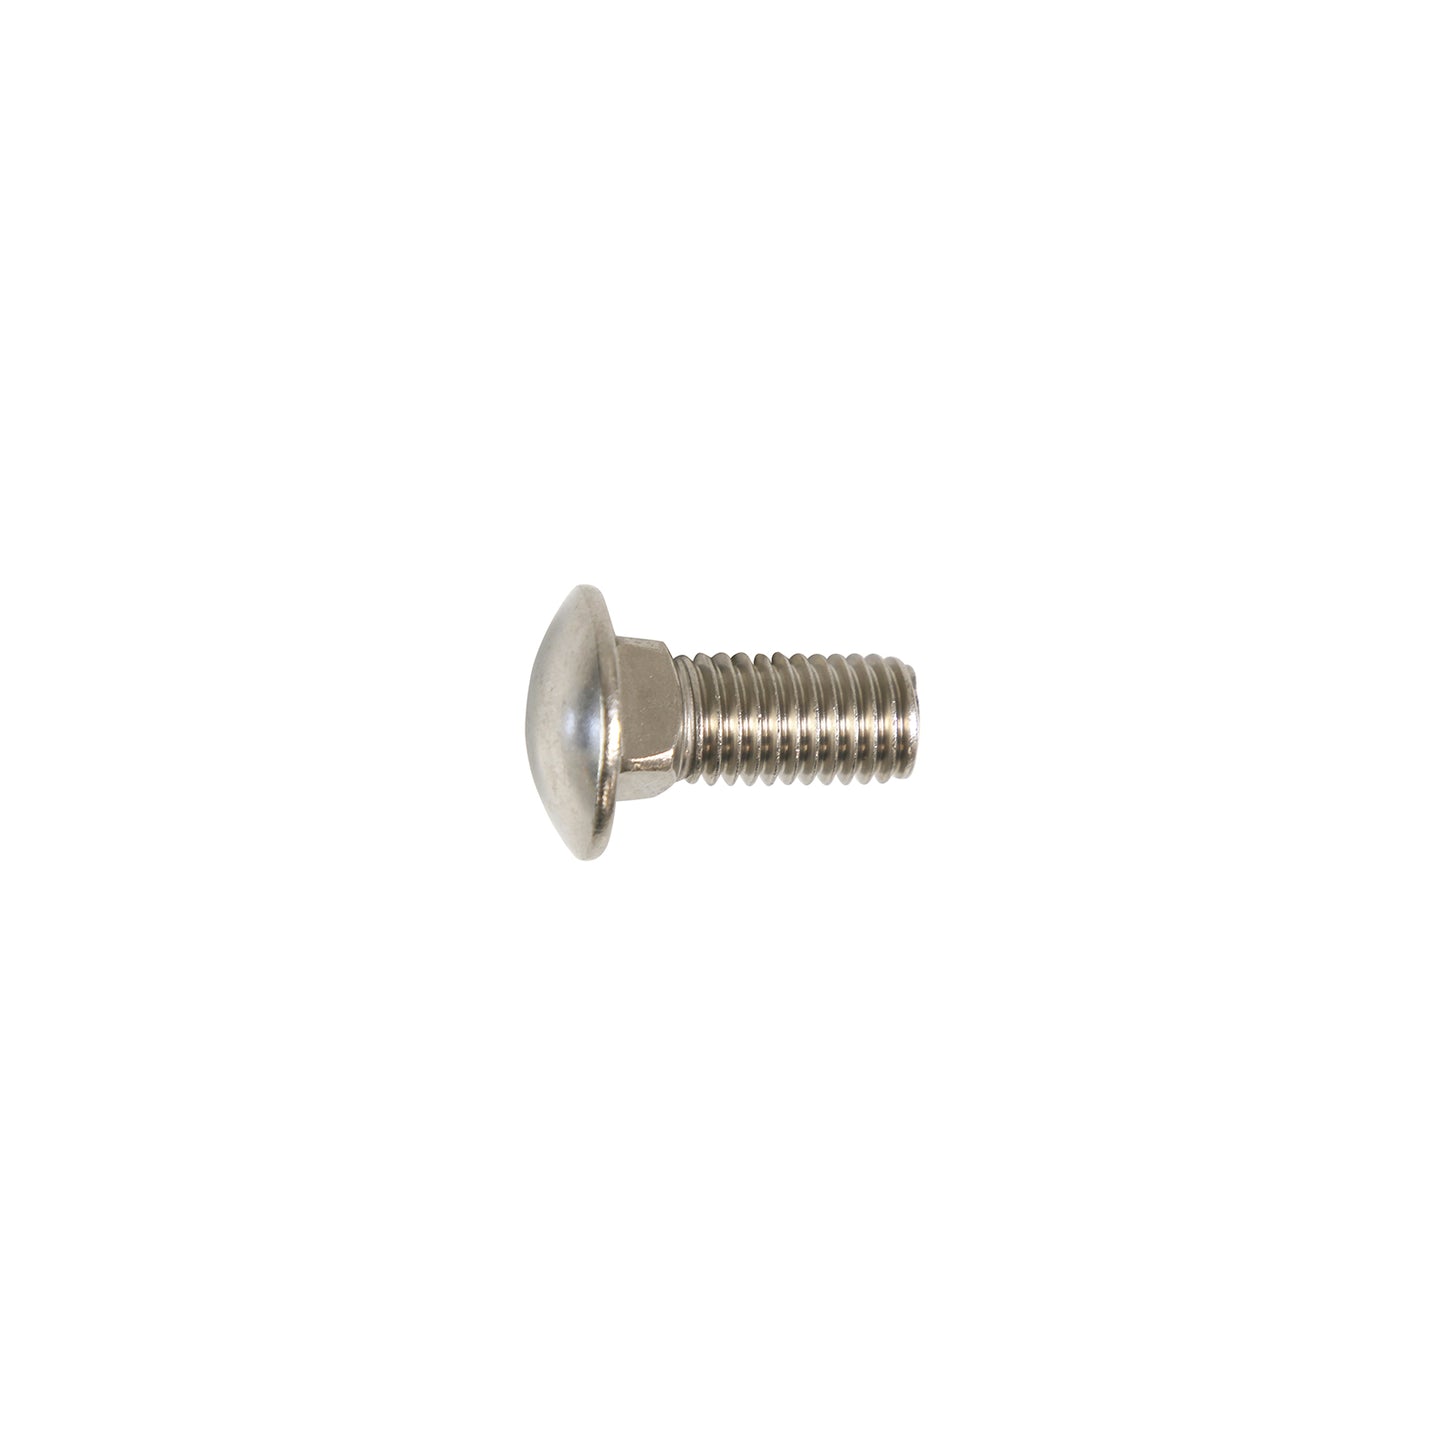 5/8"-11 x 1-1/2" Conquest Carriage Bolt - 304 Stainless Steel